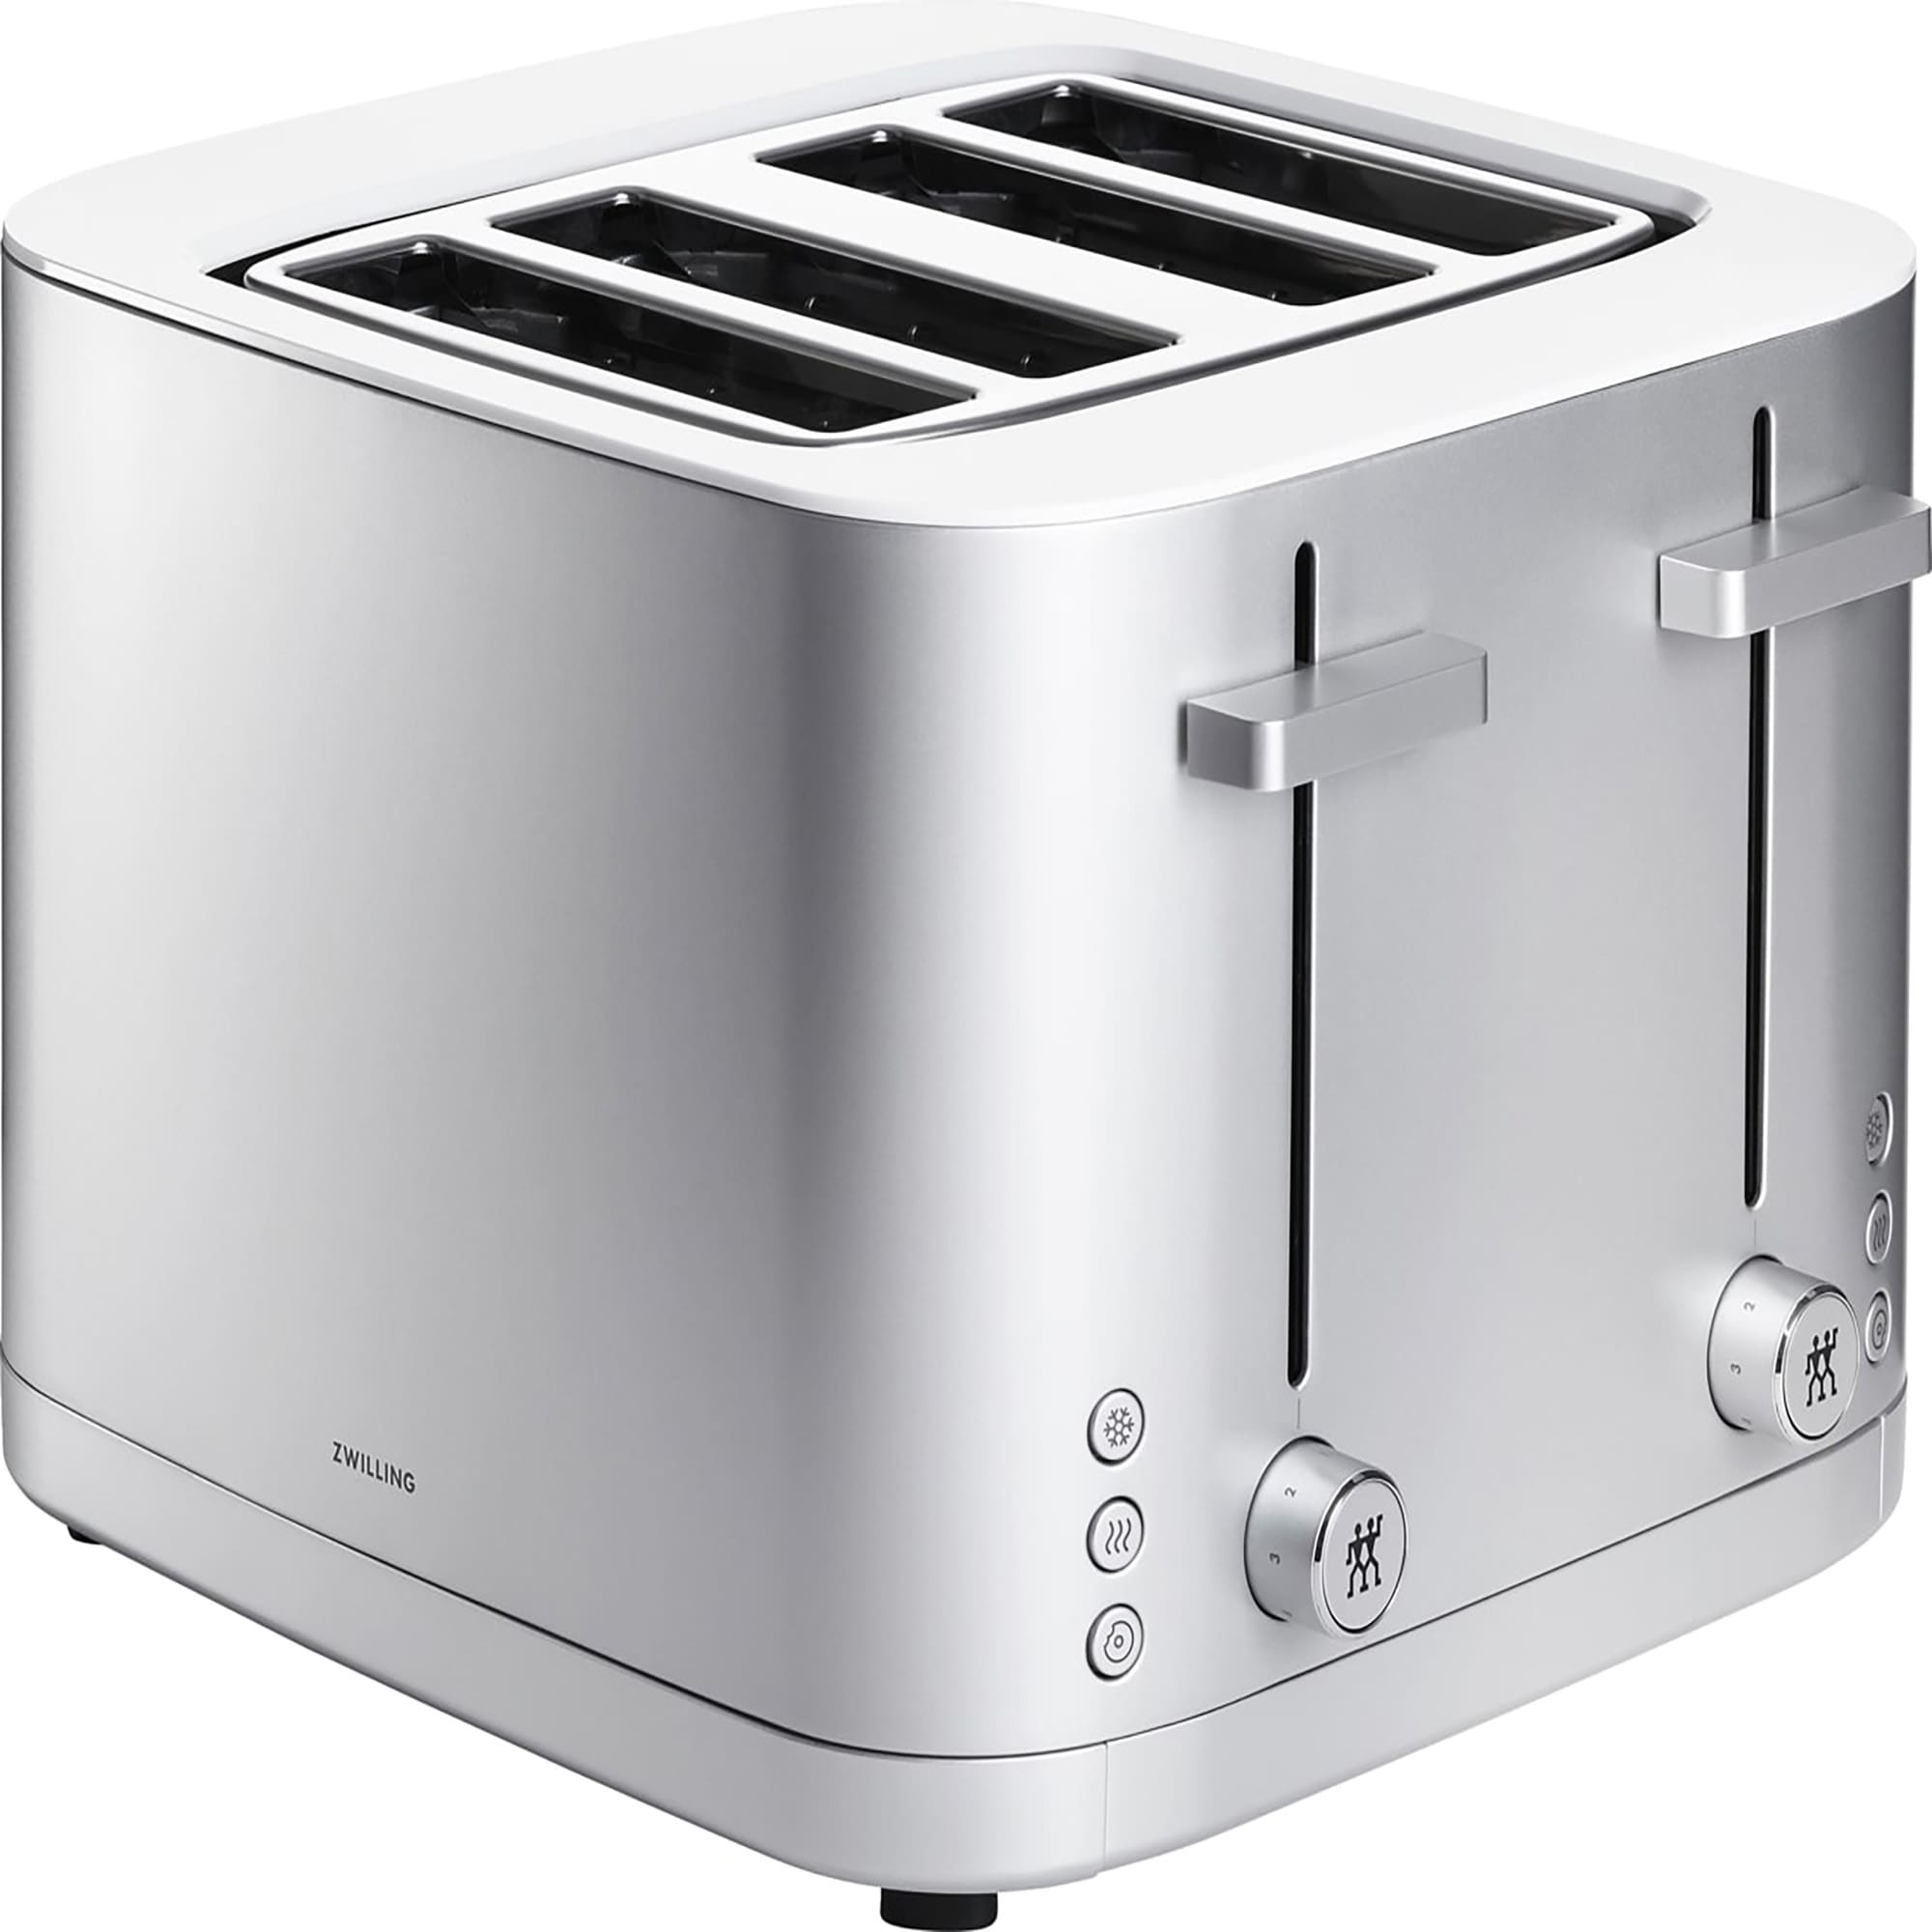 https://ak1.ostkcdn.com/images/products/is/images/direct/682cf4658975a30ca738cf8f1ef6a19ebe6463c8/ZWILLING-Enfinigy-4-slot-Toaster.jpg